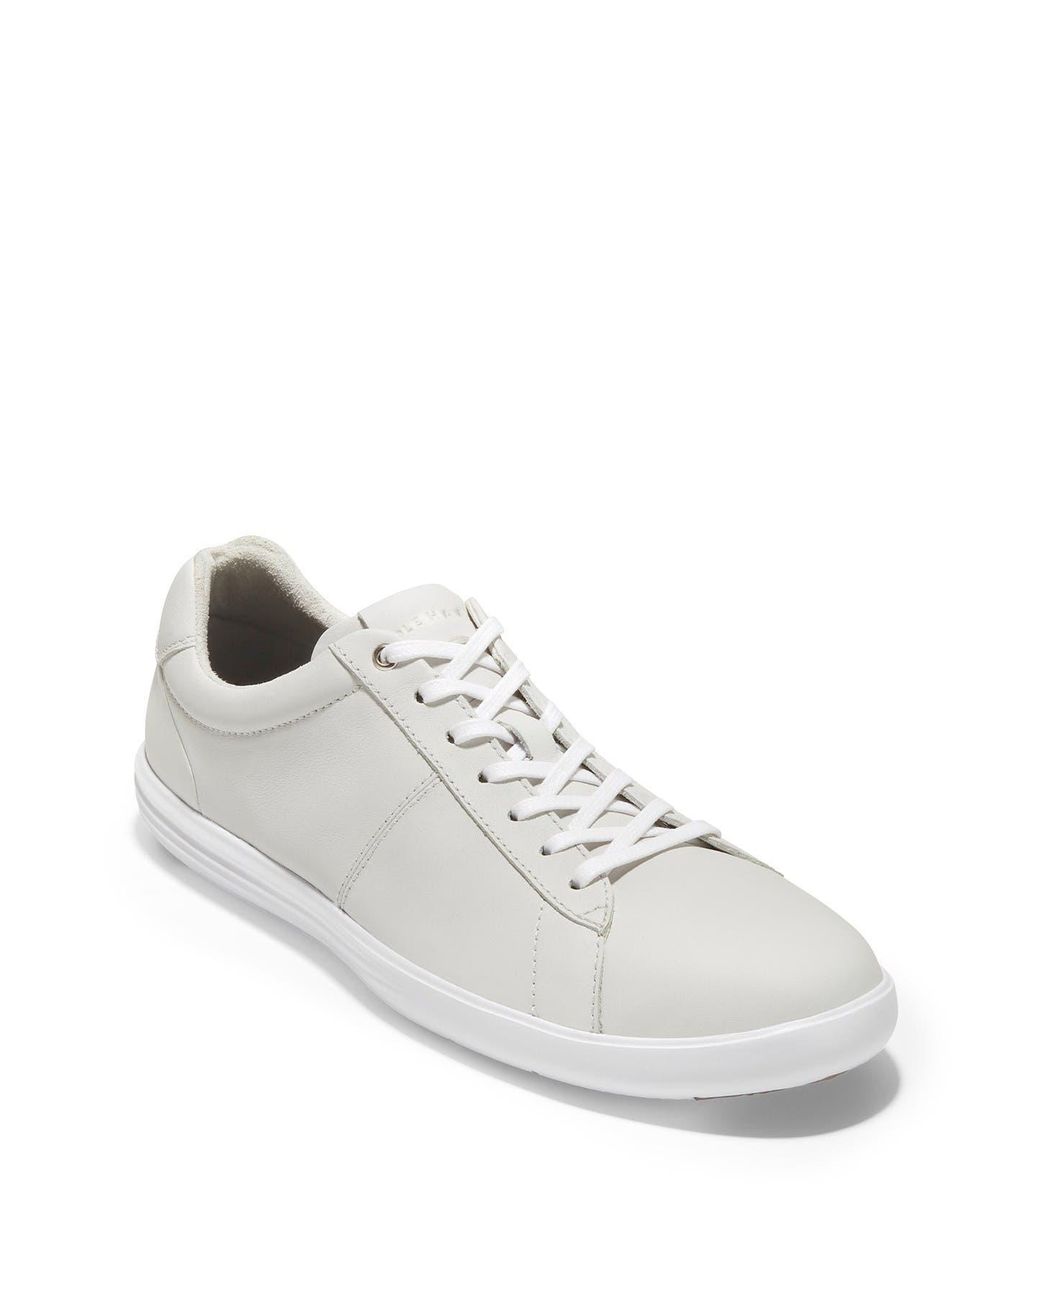 Cole Haan Leather Reagan Sneaker In Optic Whit At Nordstrom 